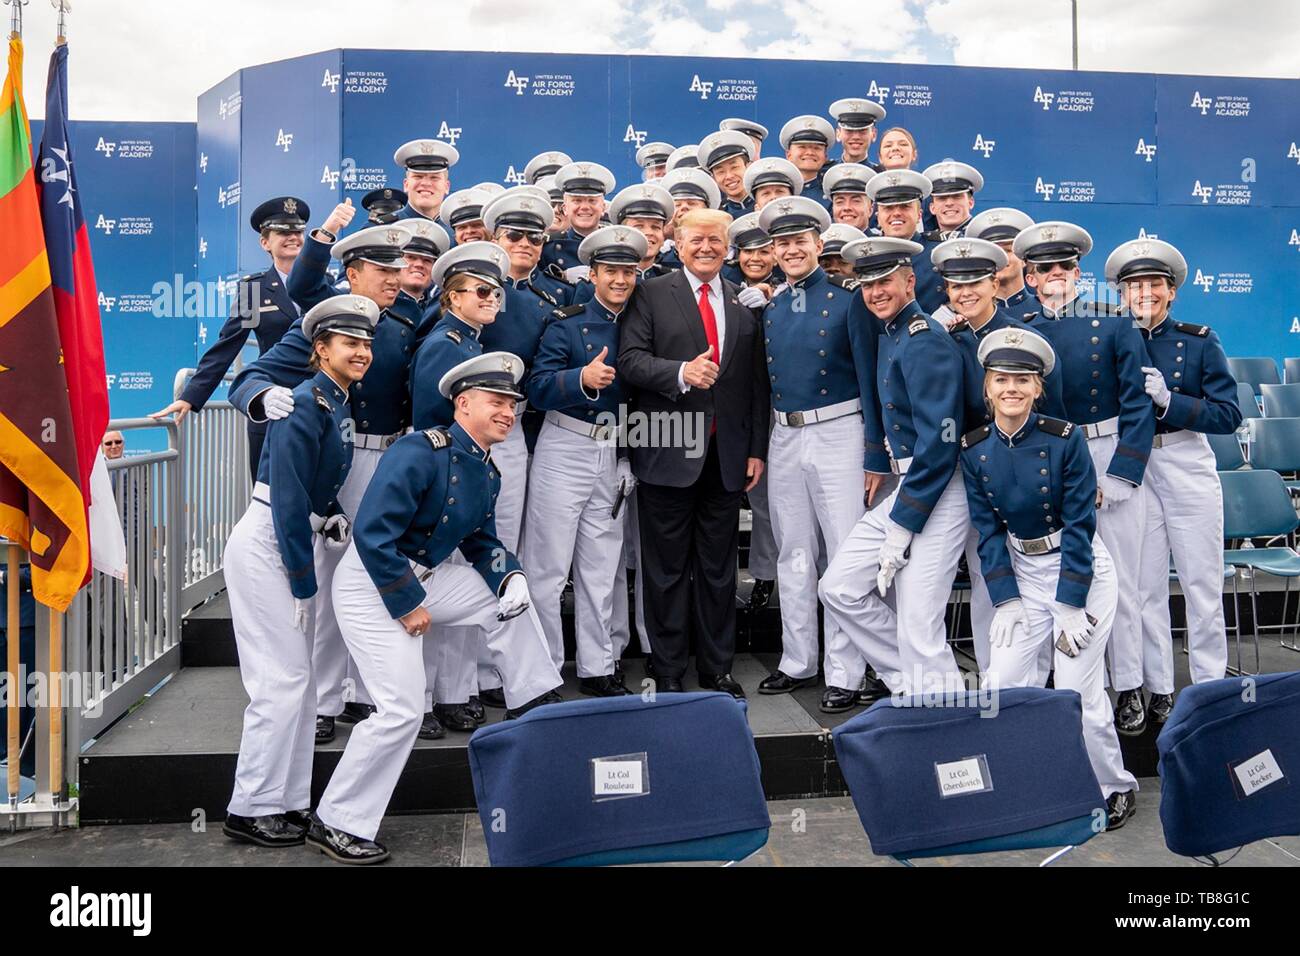 U.S President Donald Trump poses with a group of graduating cadets following the U.S. Air Force Academy Graduation Ceremony at the USAF Academy Falcon Stadium May 30, 2019 in Colorado Springs, Colorado. Credit: Planetpix/Alamy Live News Stock Photo